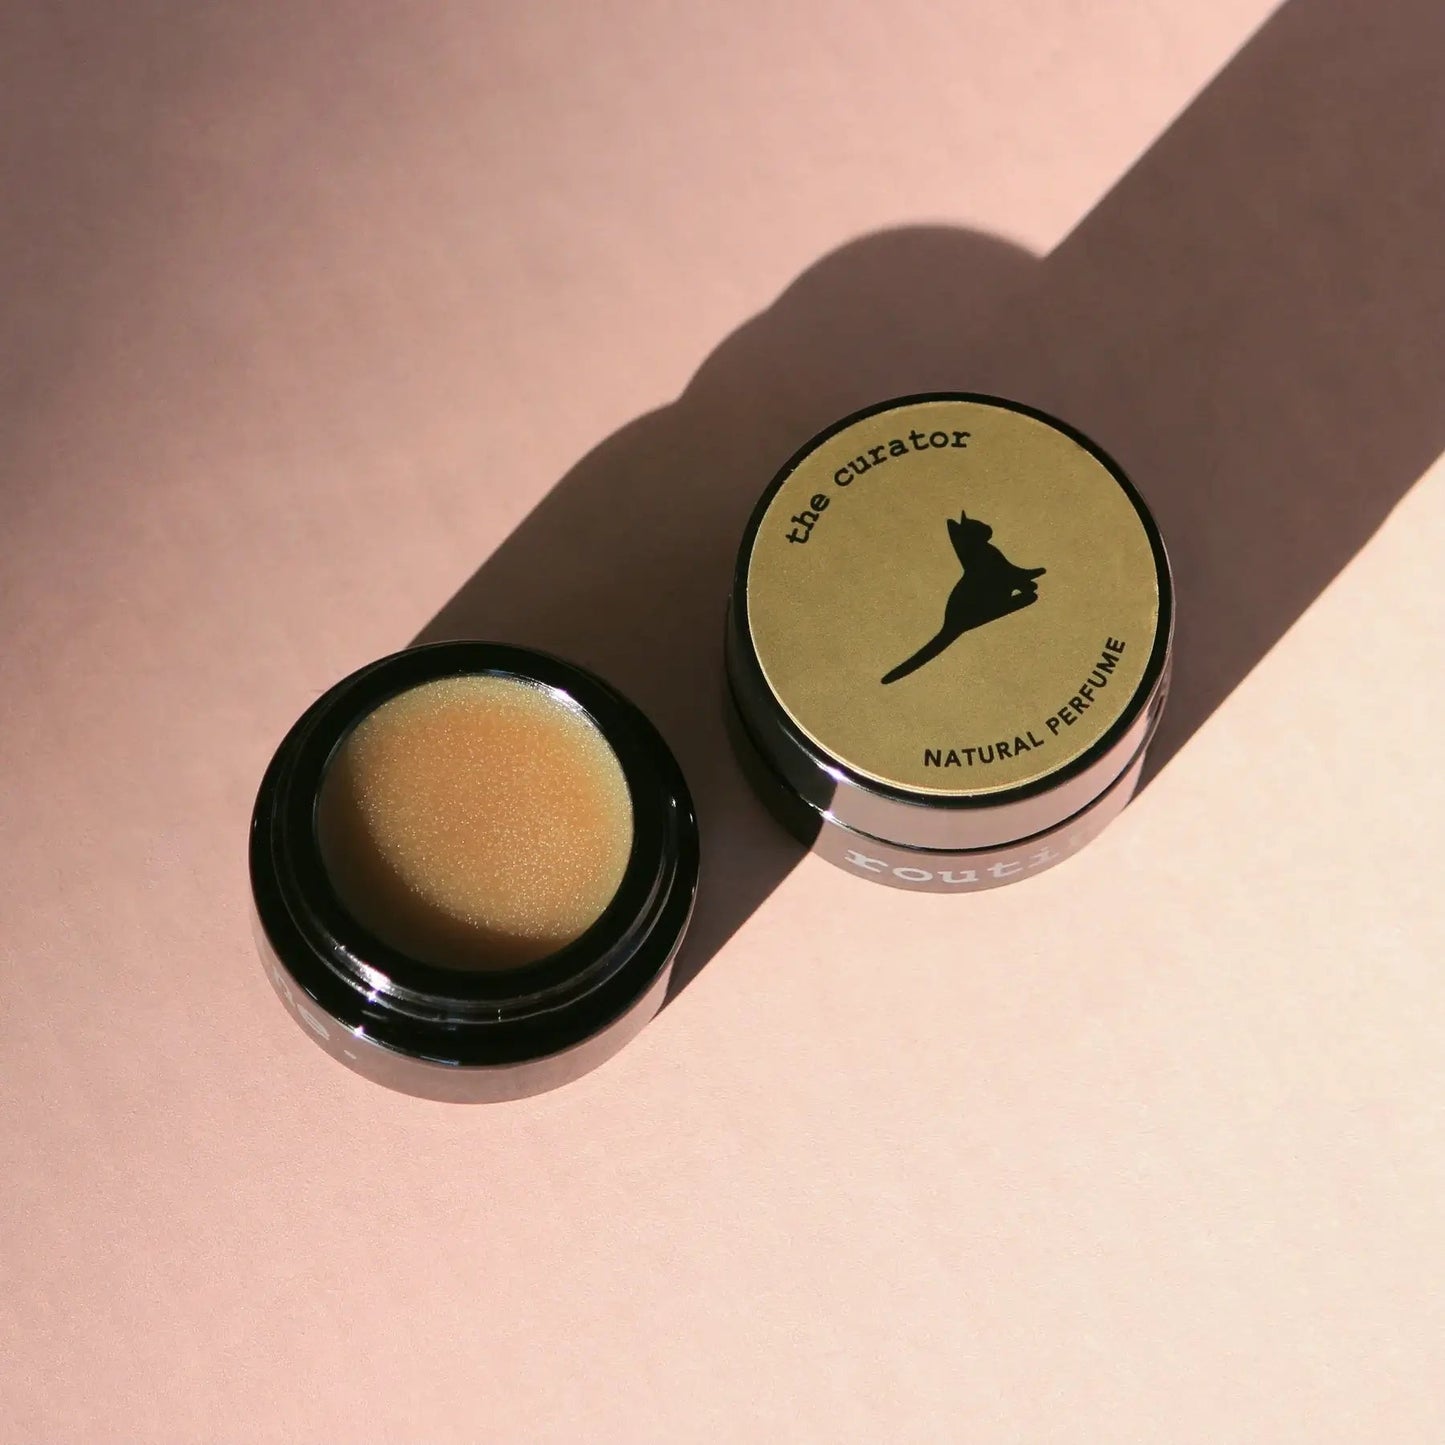 The Curator - Solid Perfume by Routine Bath and Body Routine Prettycleanshop